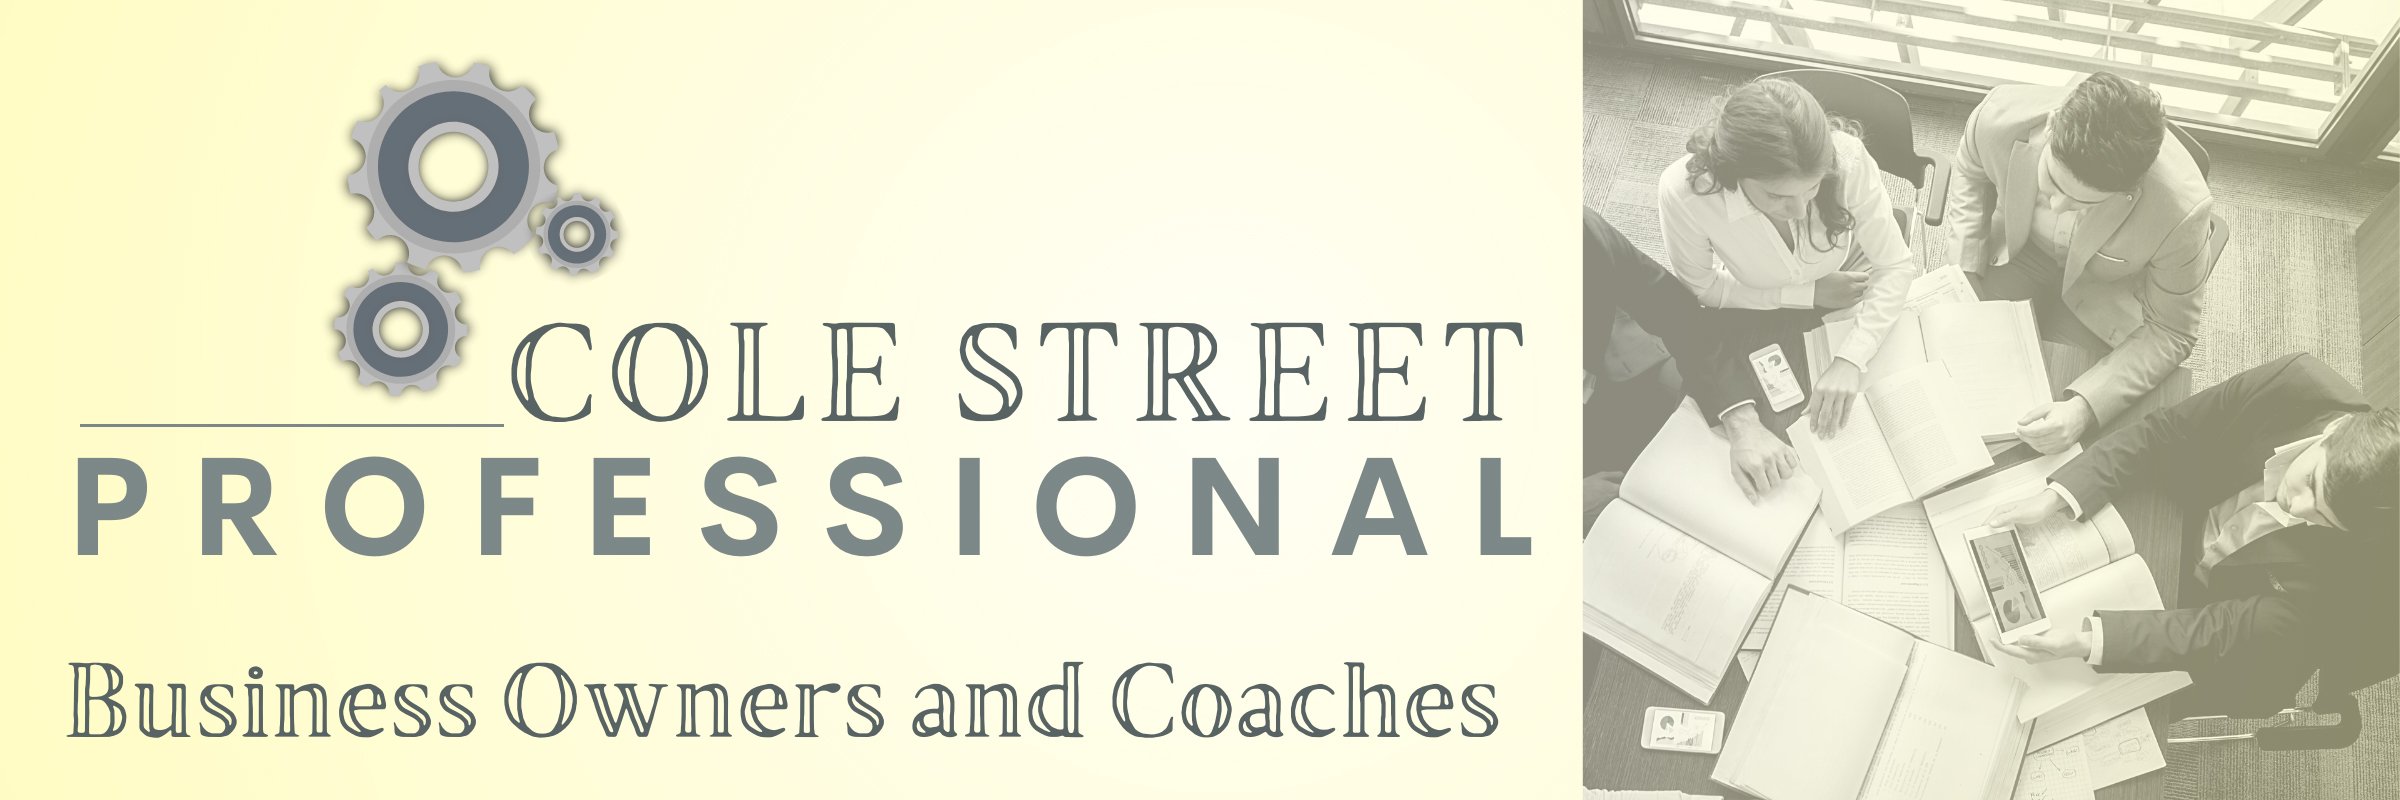 Cole Street Professional - Business Owners and Coaches